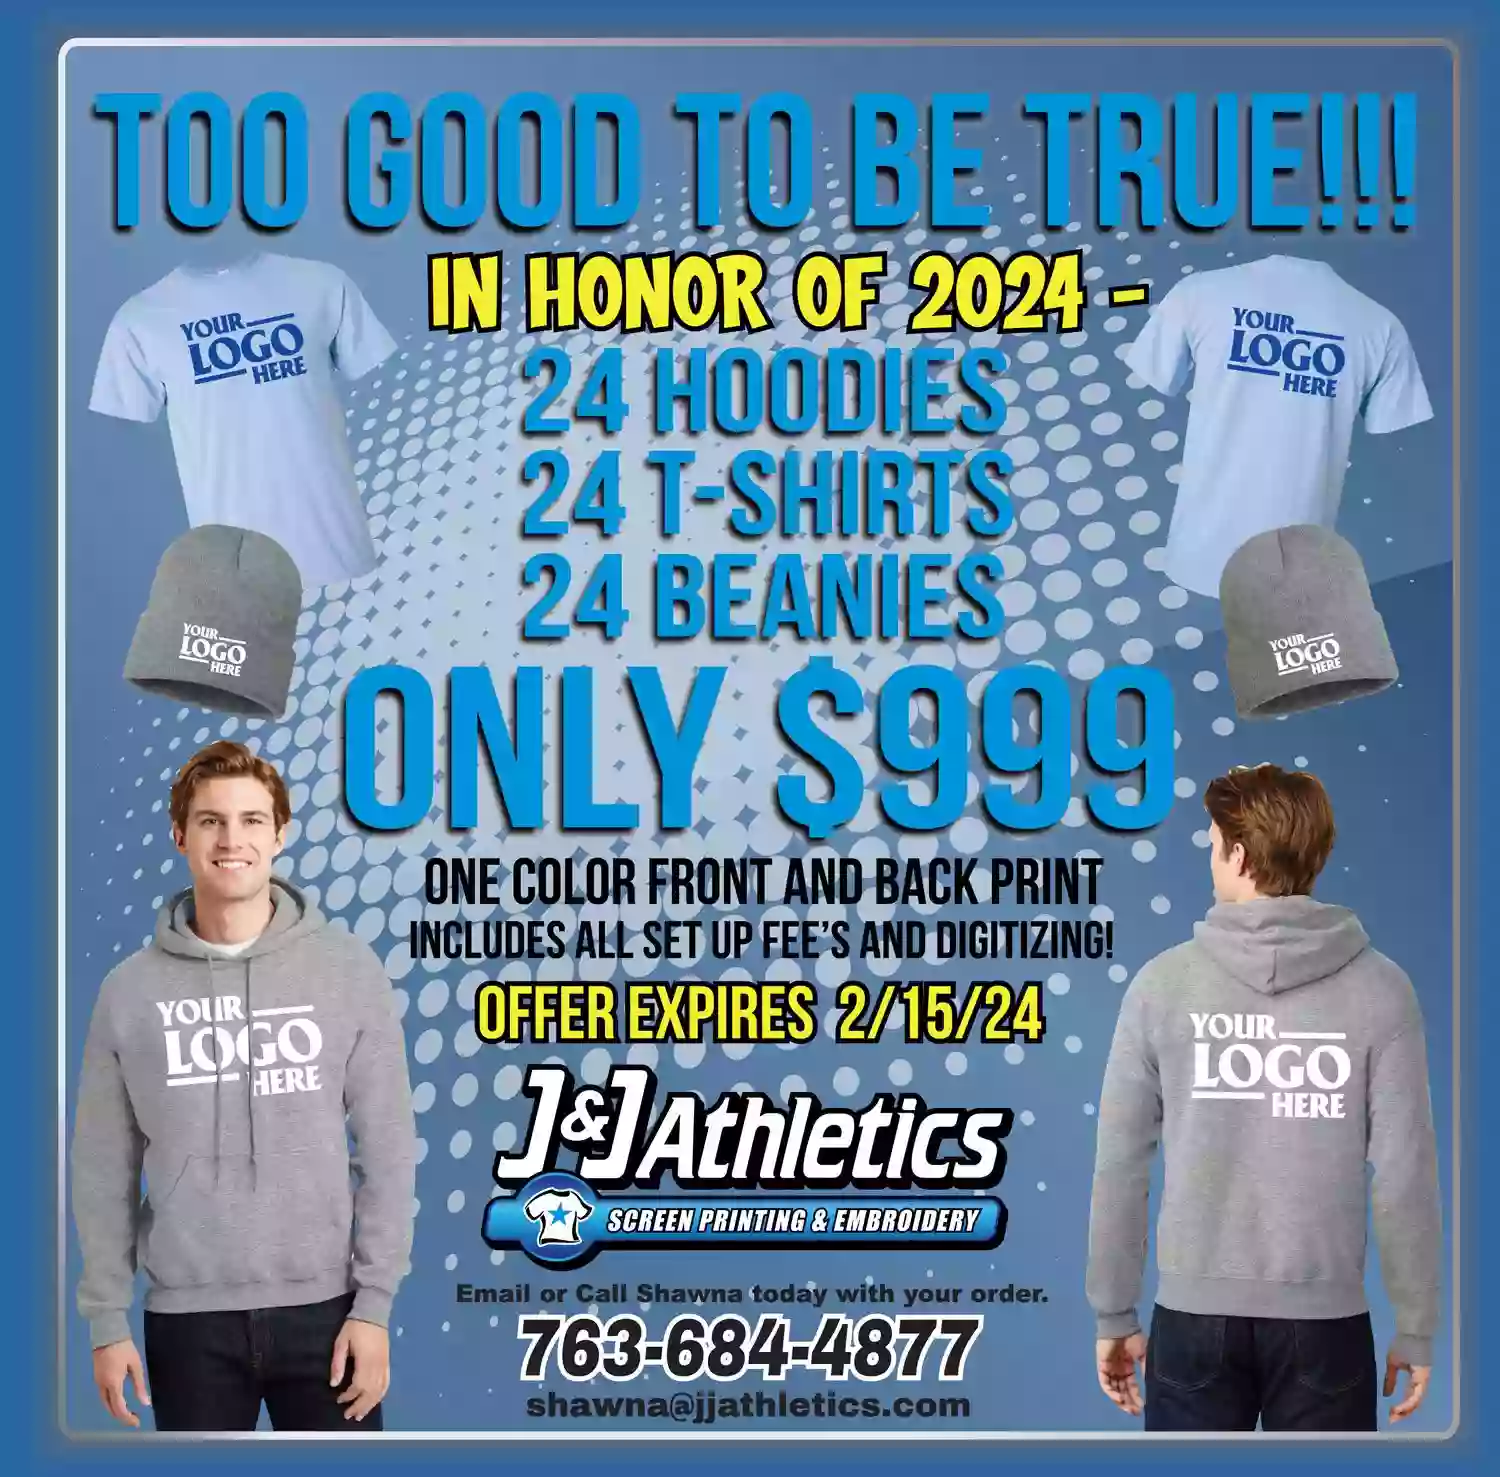 J&J Athletics *Open by Appointment Only*